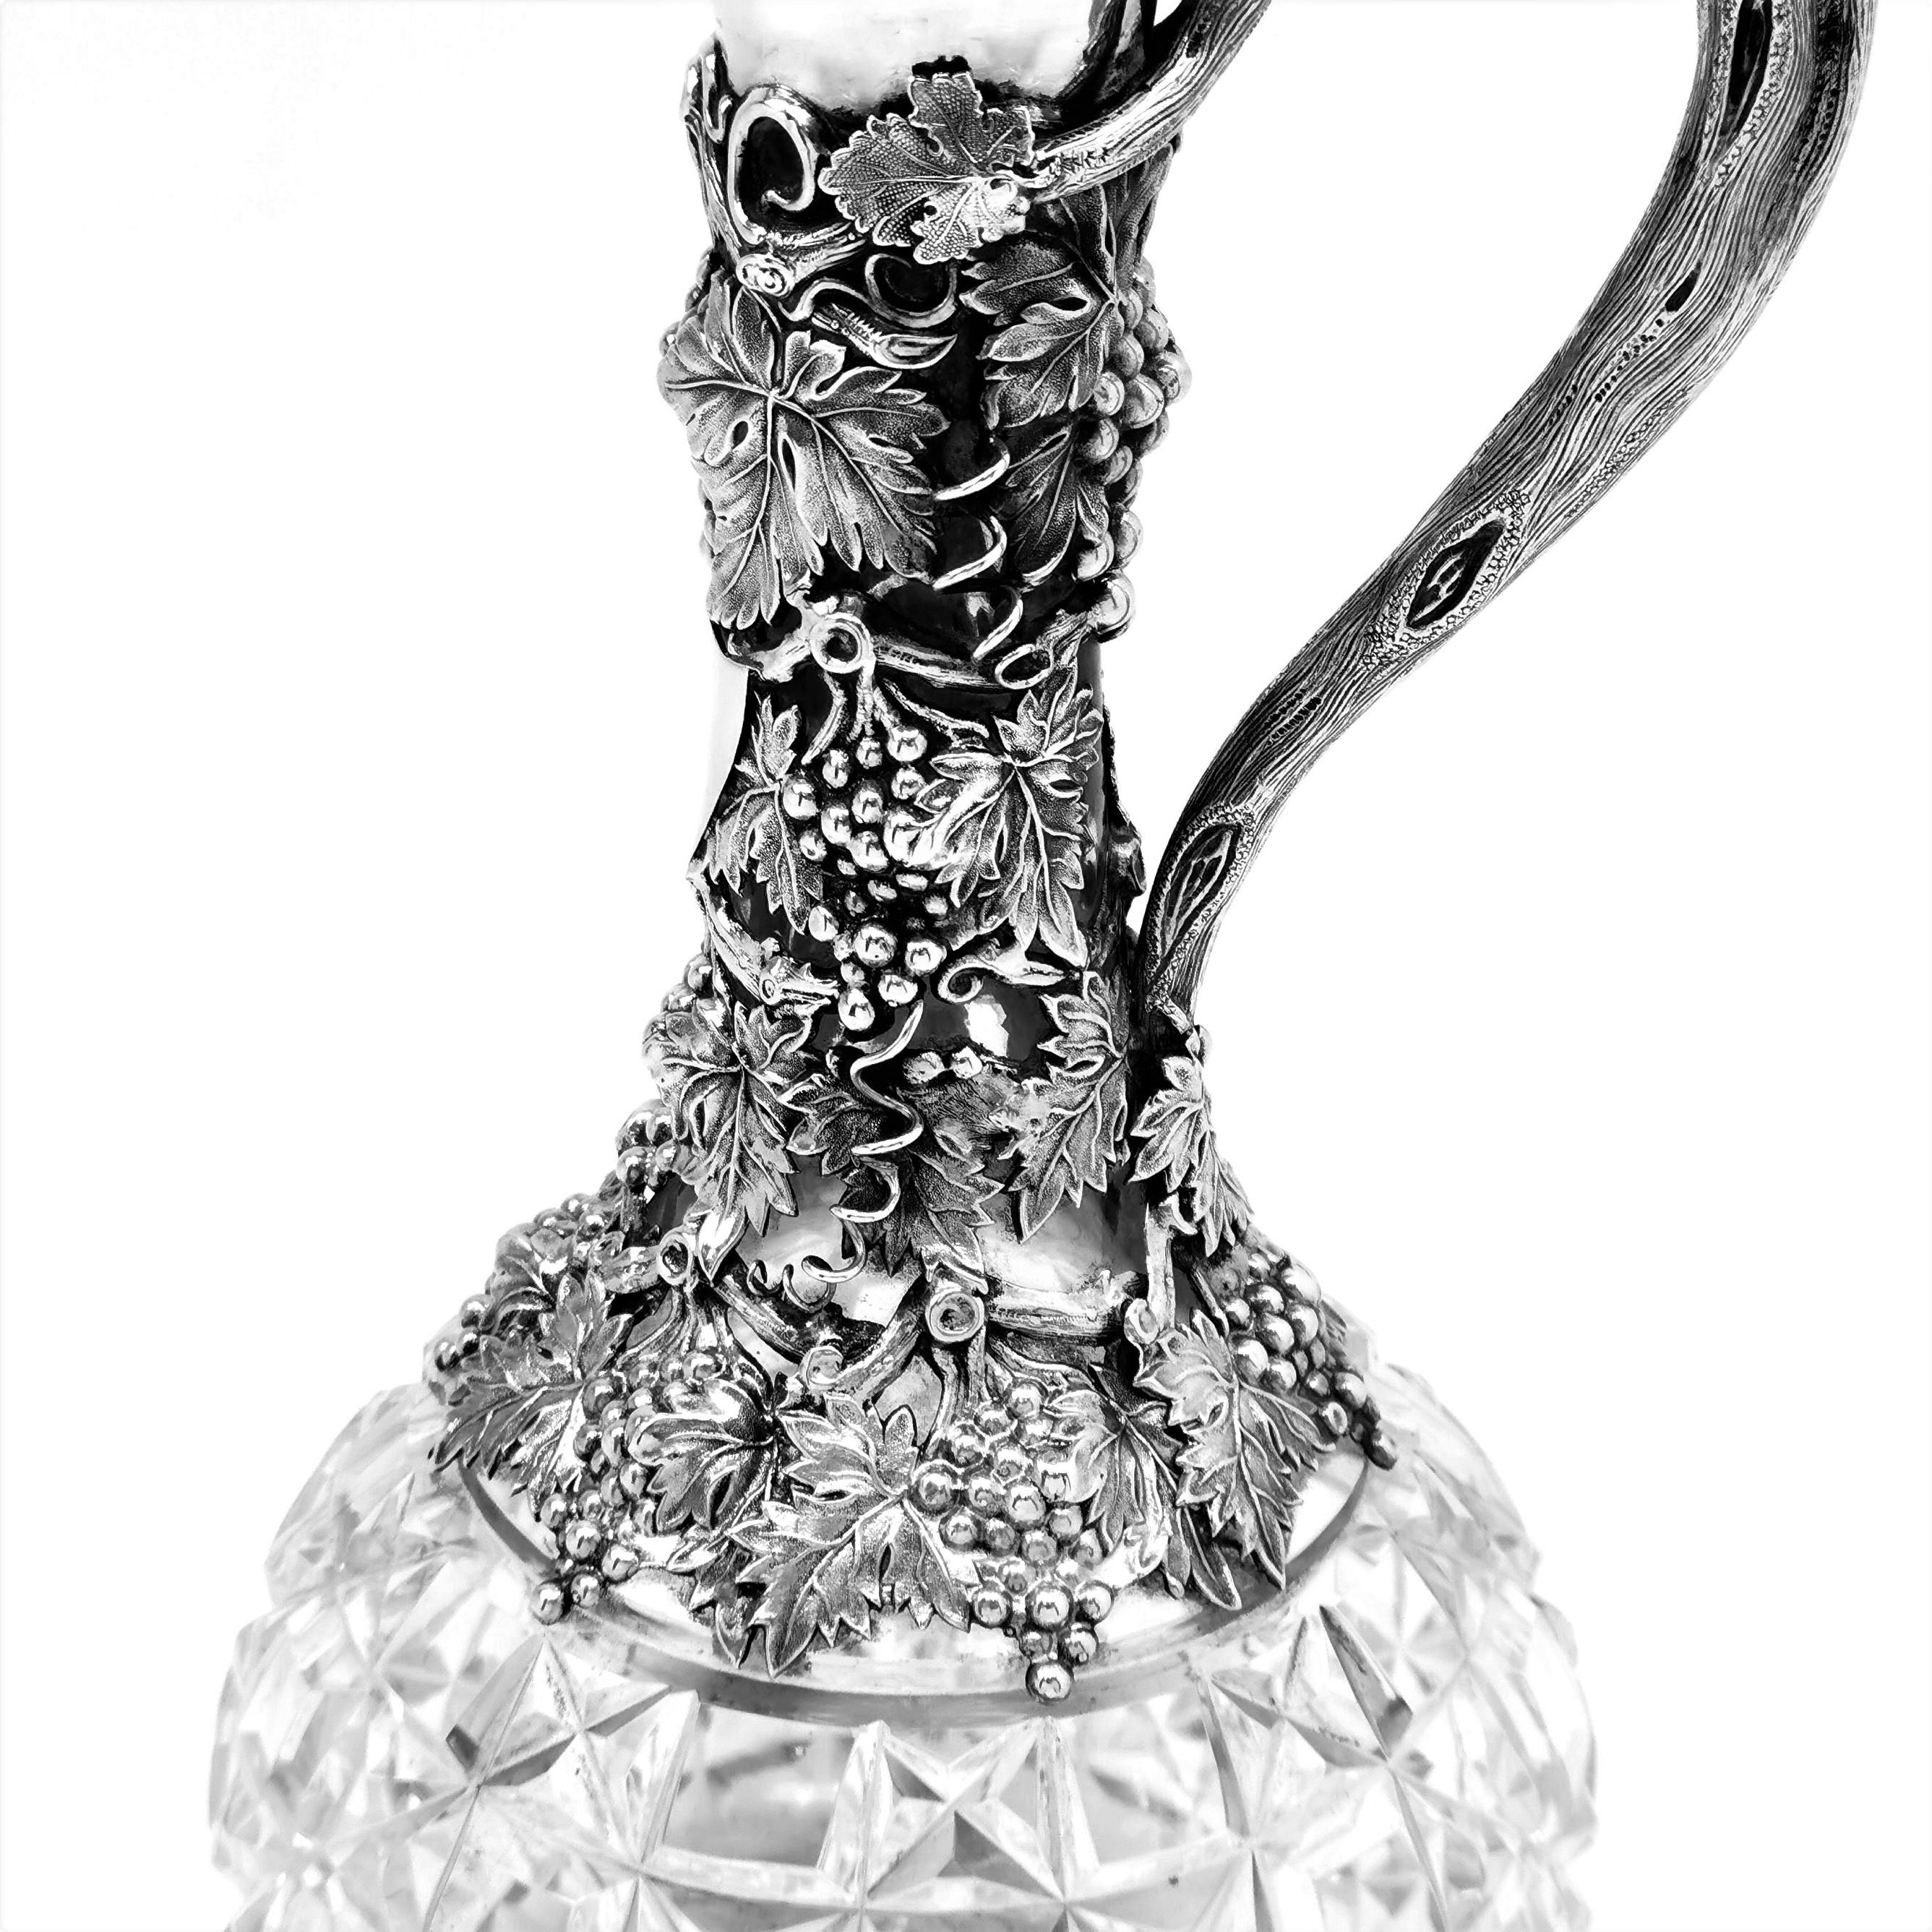 English Antique Victorian Sterling Silver & Cut Glass Claret Jug 1880 Wine Decanter